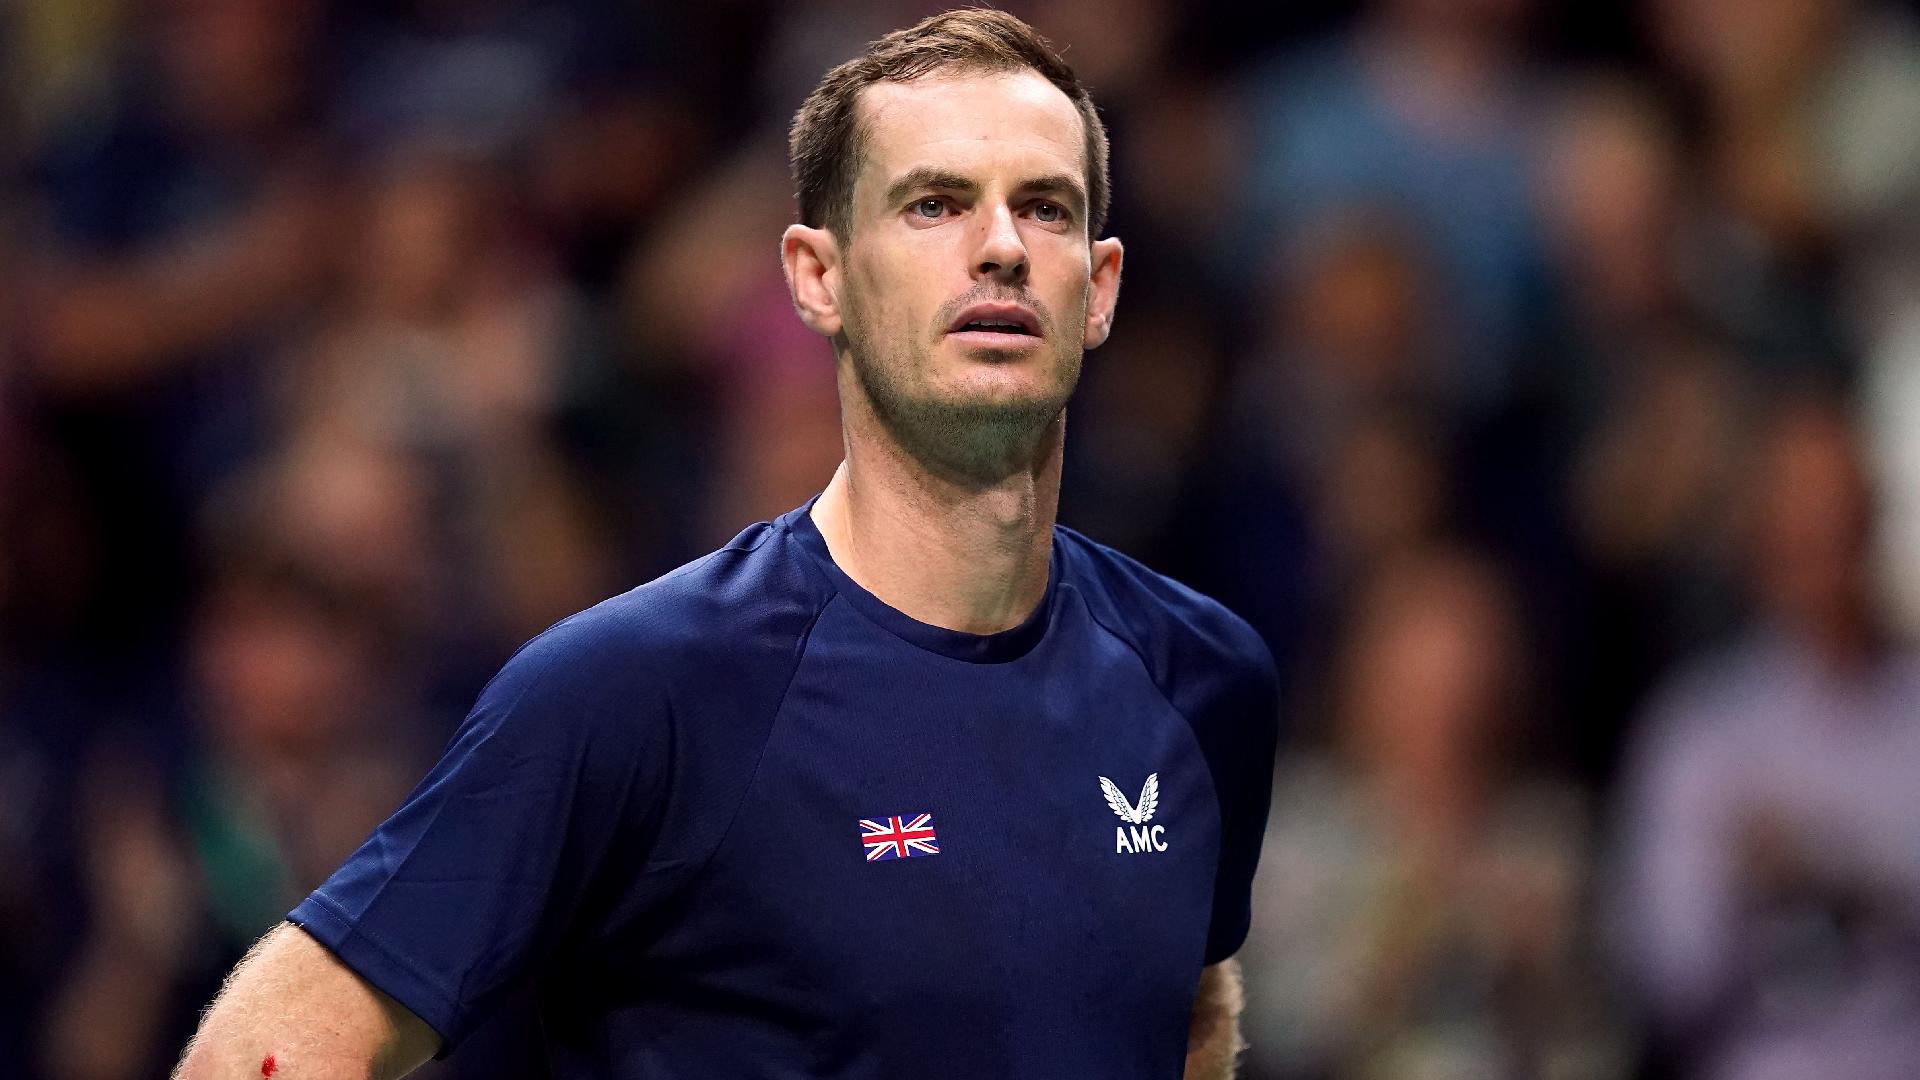 Andy Murray vows to keep playing tennis as he looks for an end to his losing run